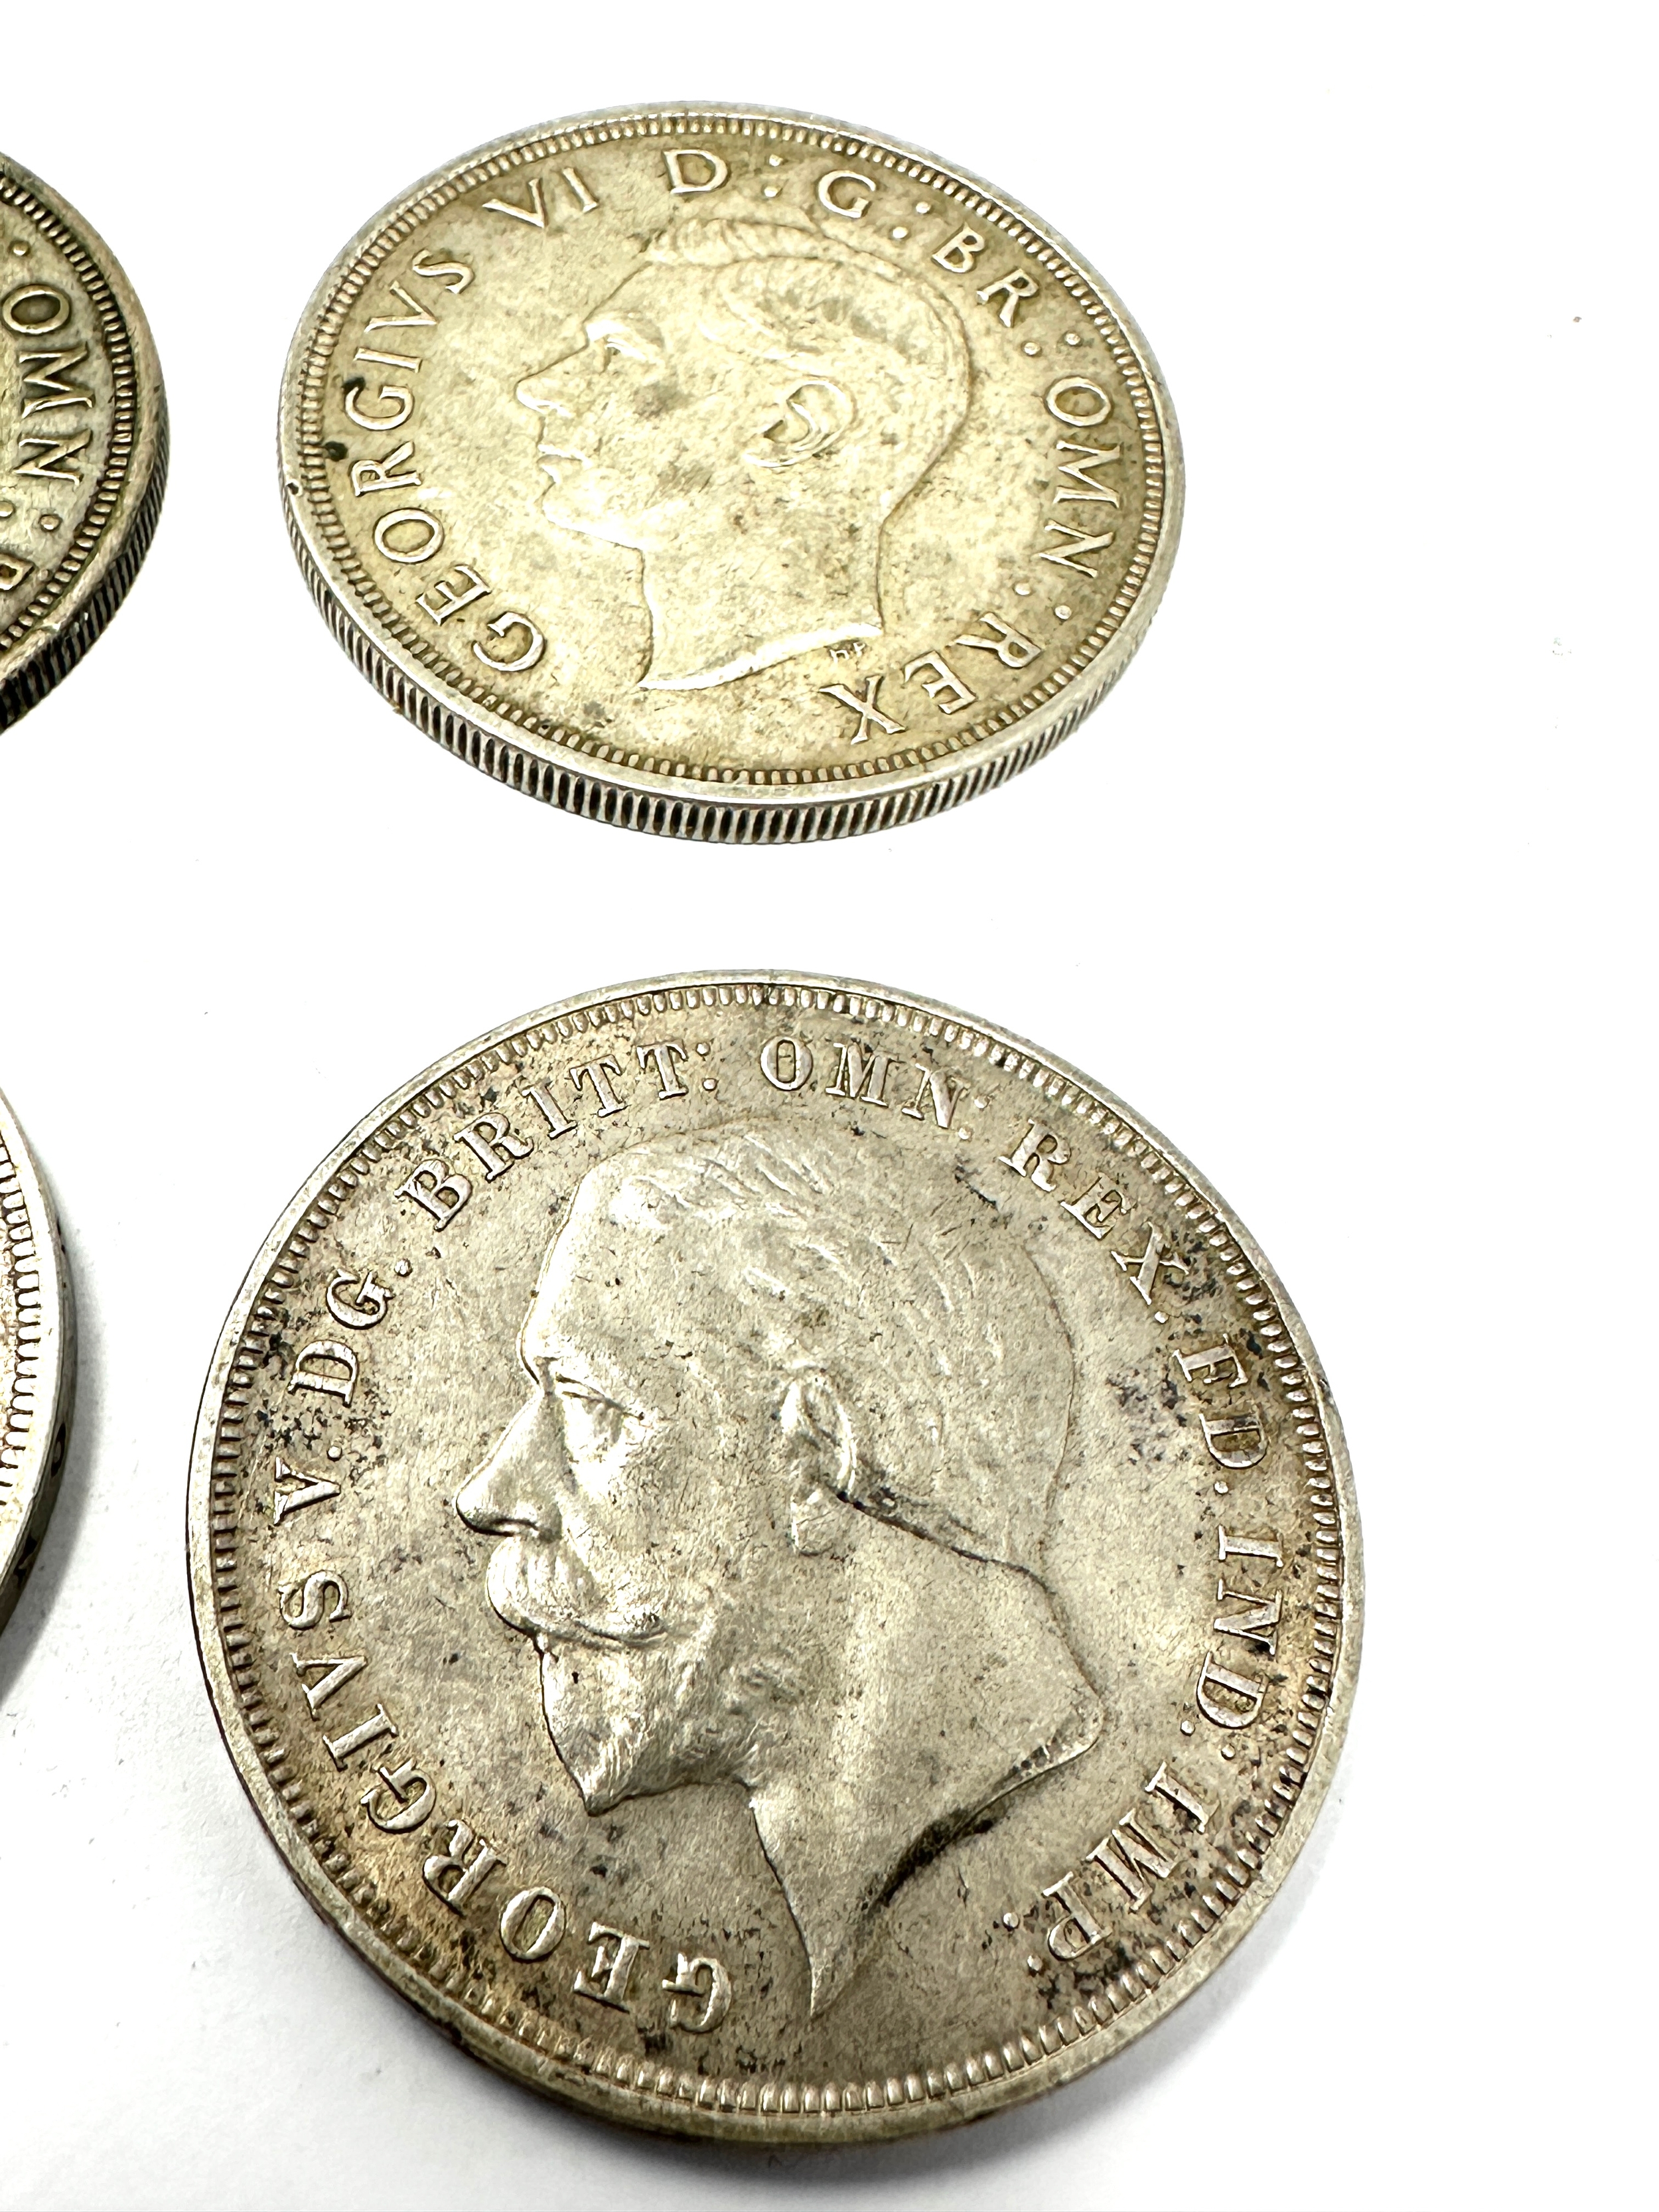 4 silver crowns 2 x 1937 & 2 x 1935 - Image 2 of 4